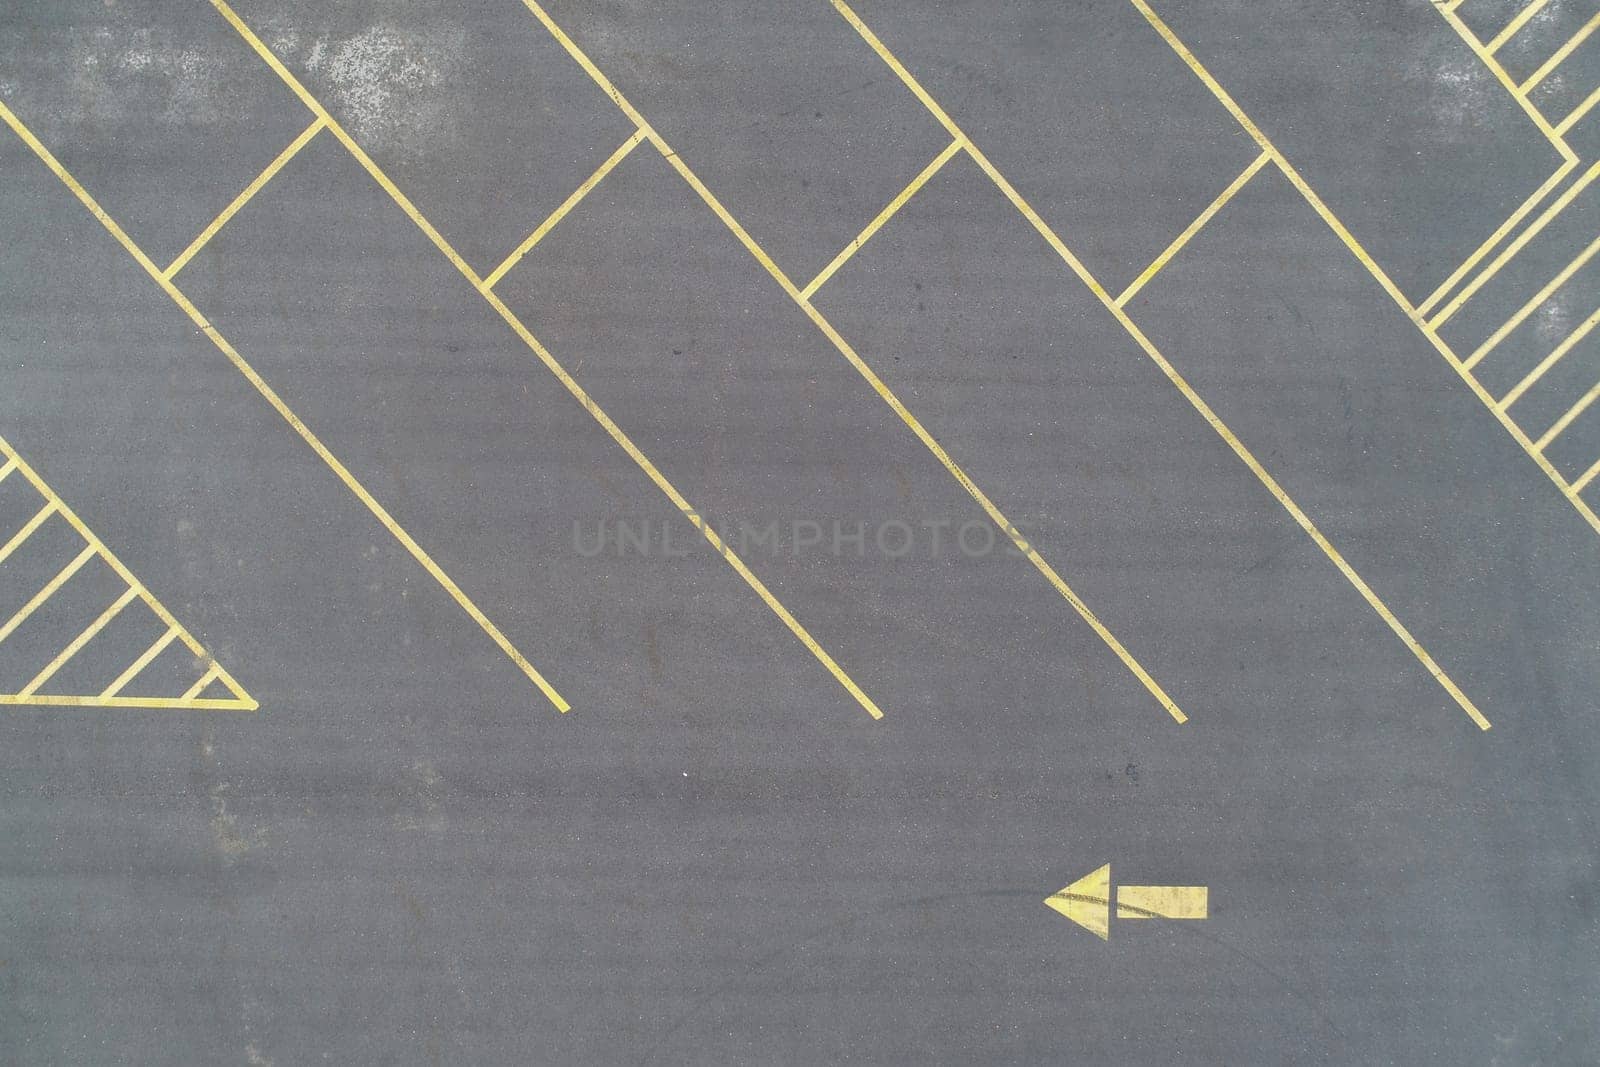 angled asphalt parking lot with yellow lines an left pointing arrow to direct traffic